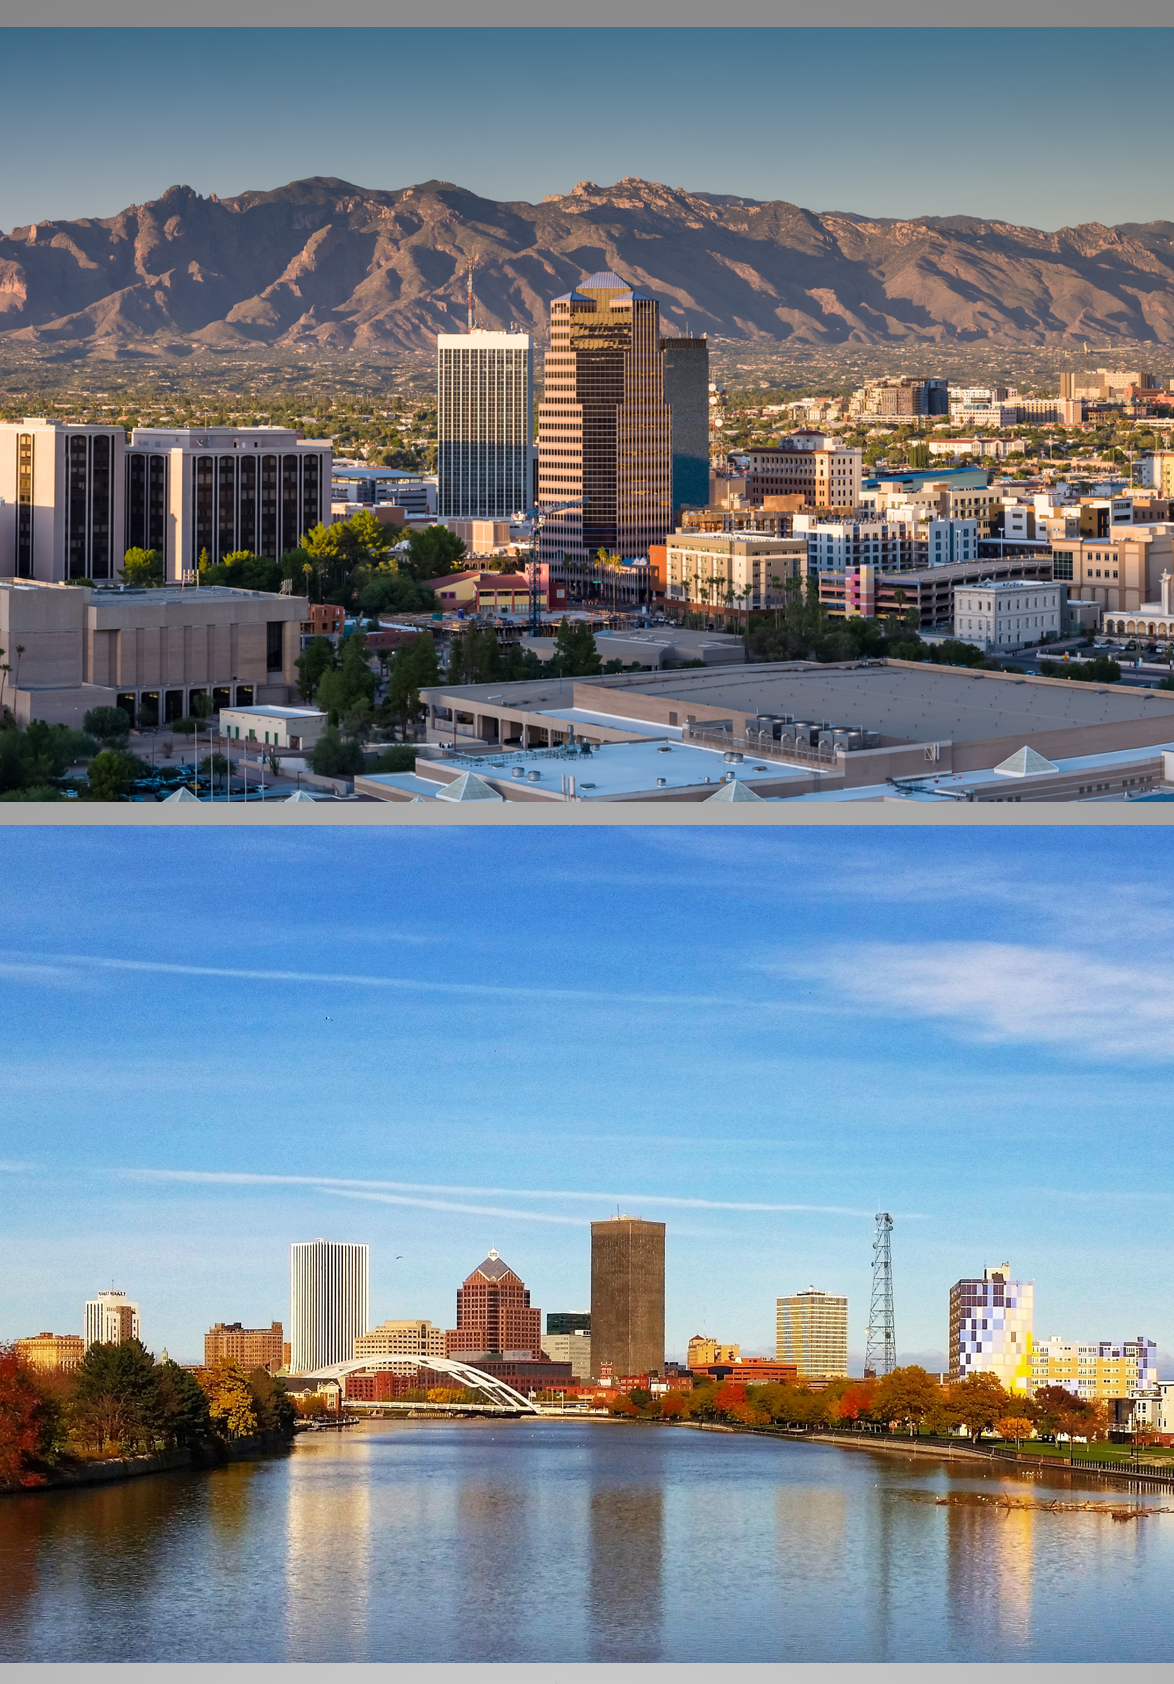 Tucson, AZ and Rochester, NY Cityscapes, the two AOM locations